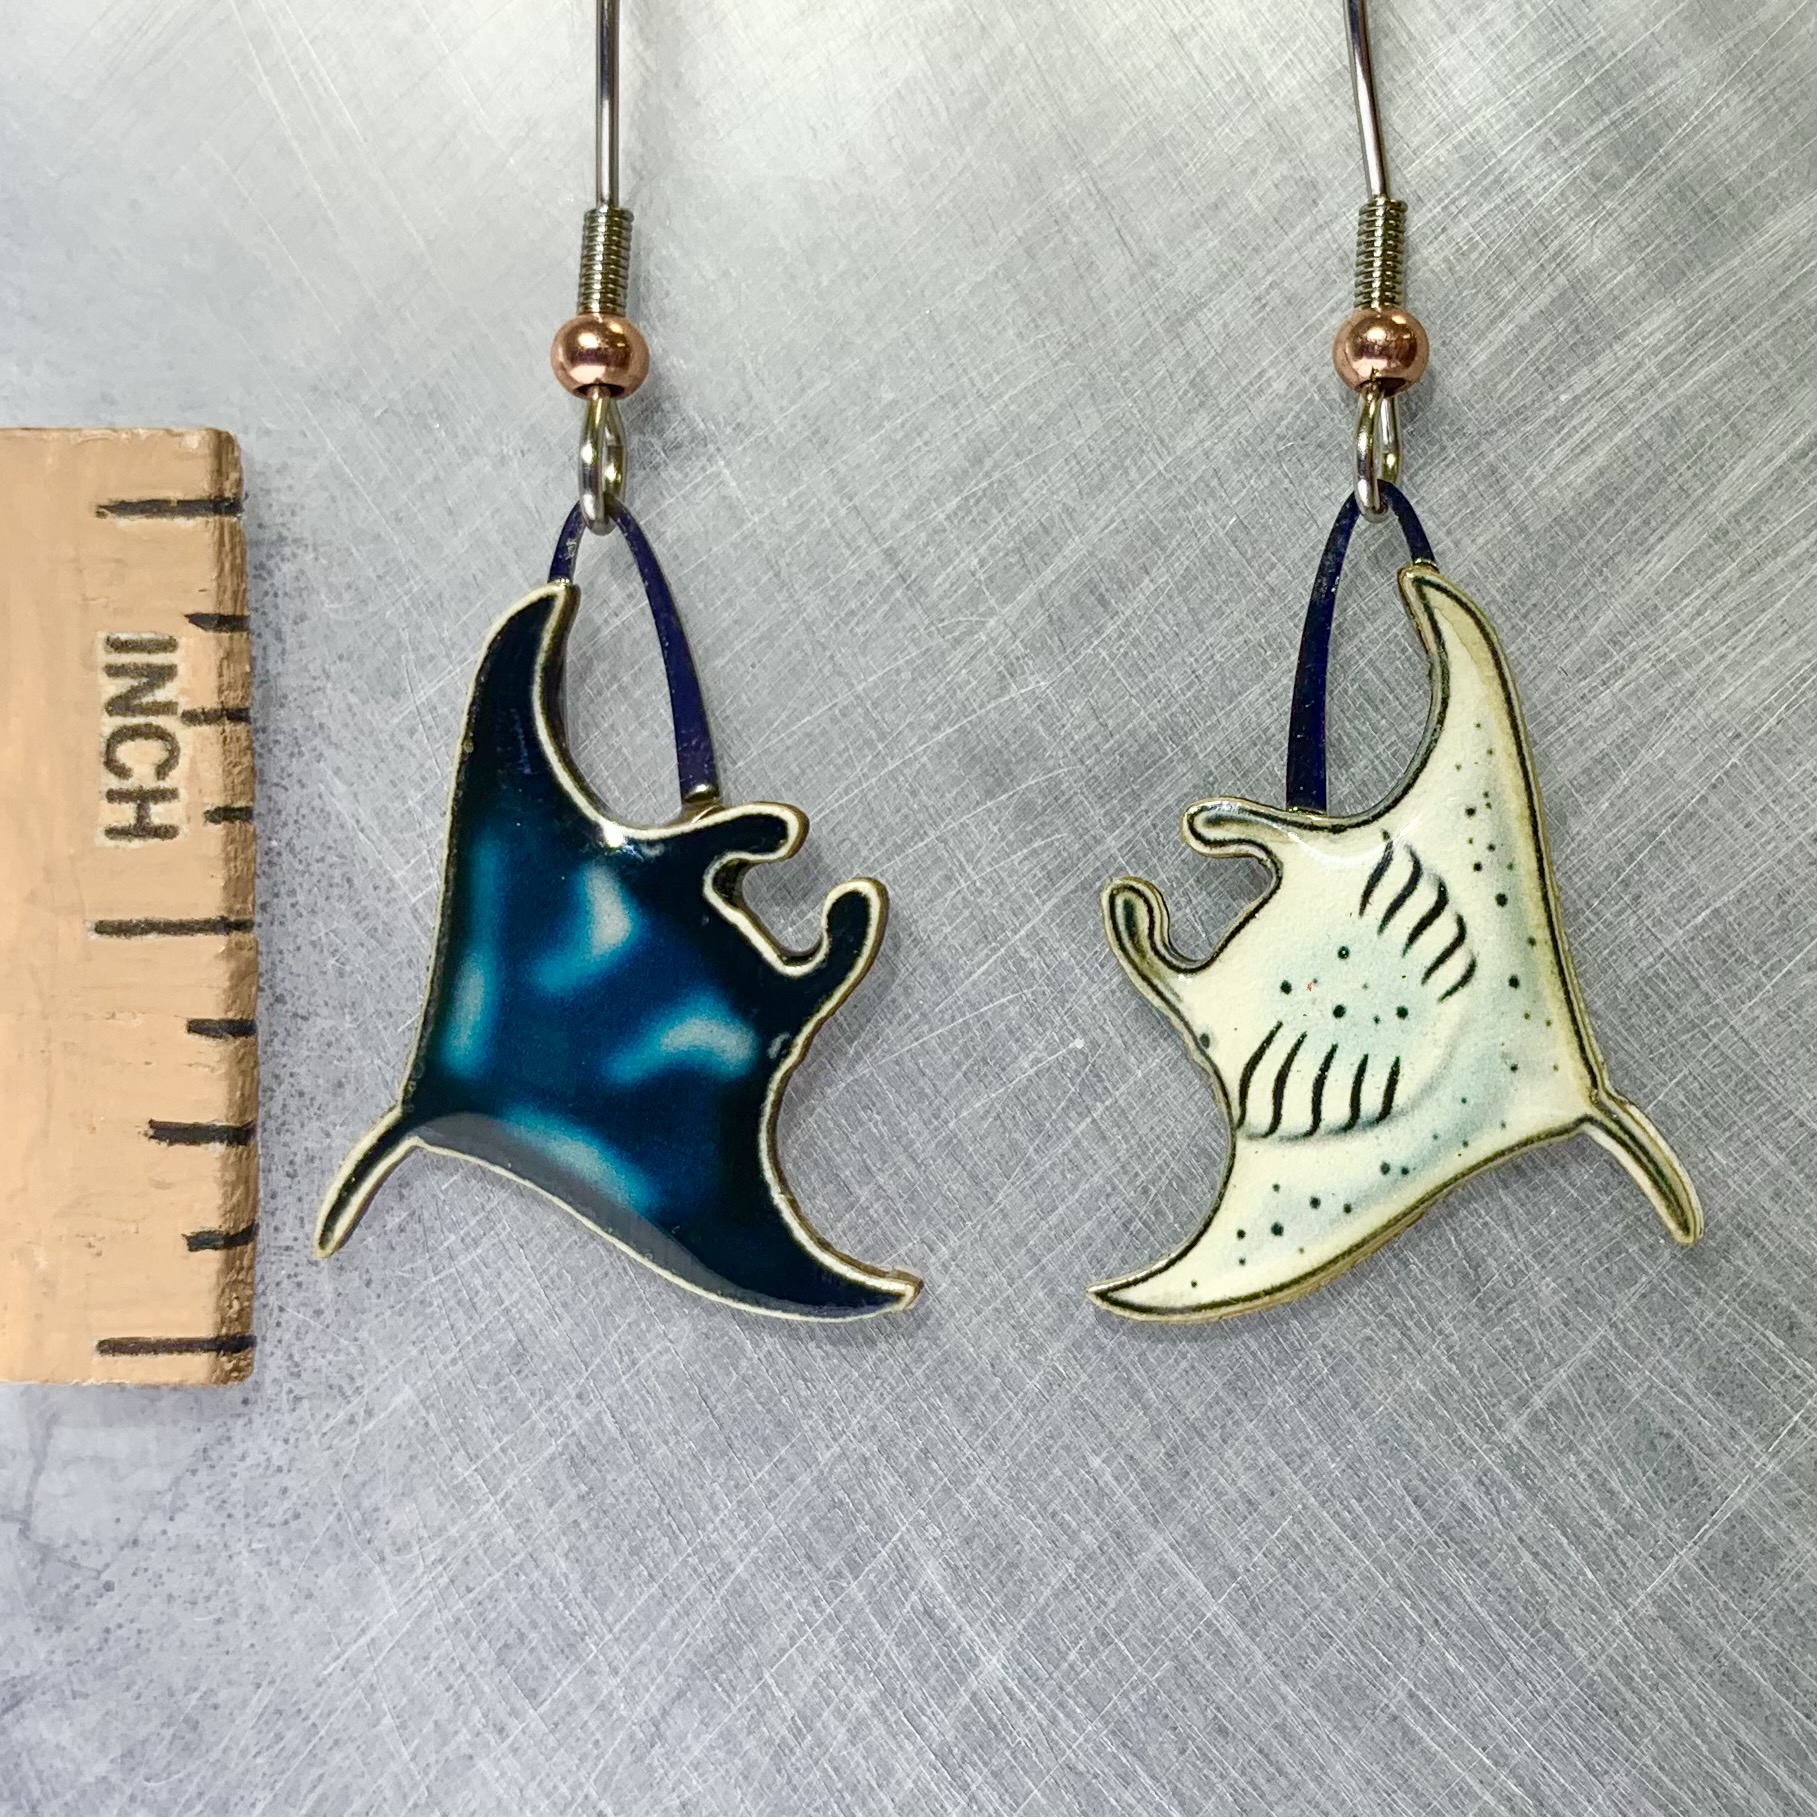 Picture shown is of 1 inch tall pair of earrings of the marine animal the Manta Ray.